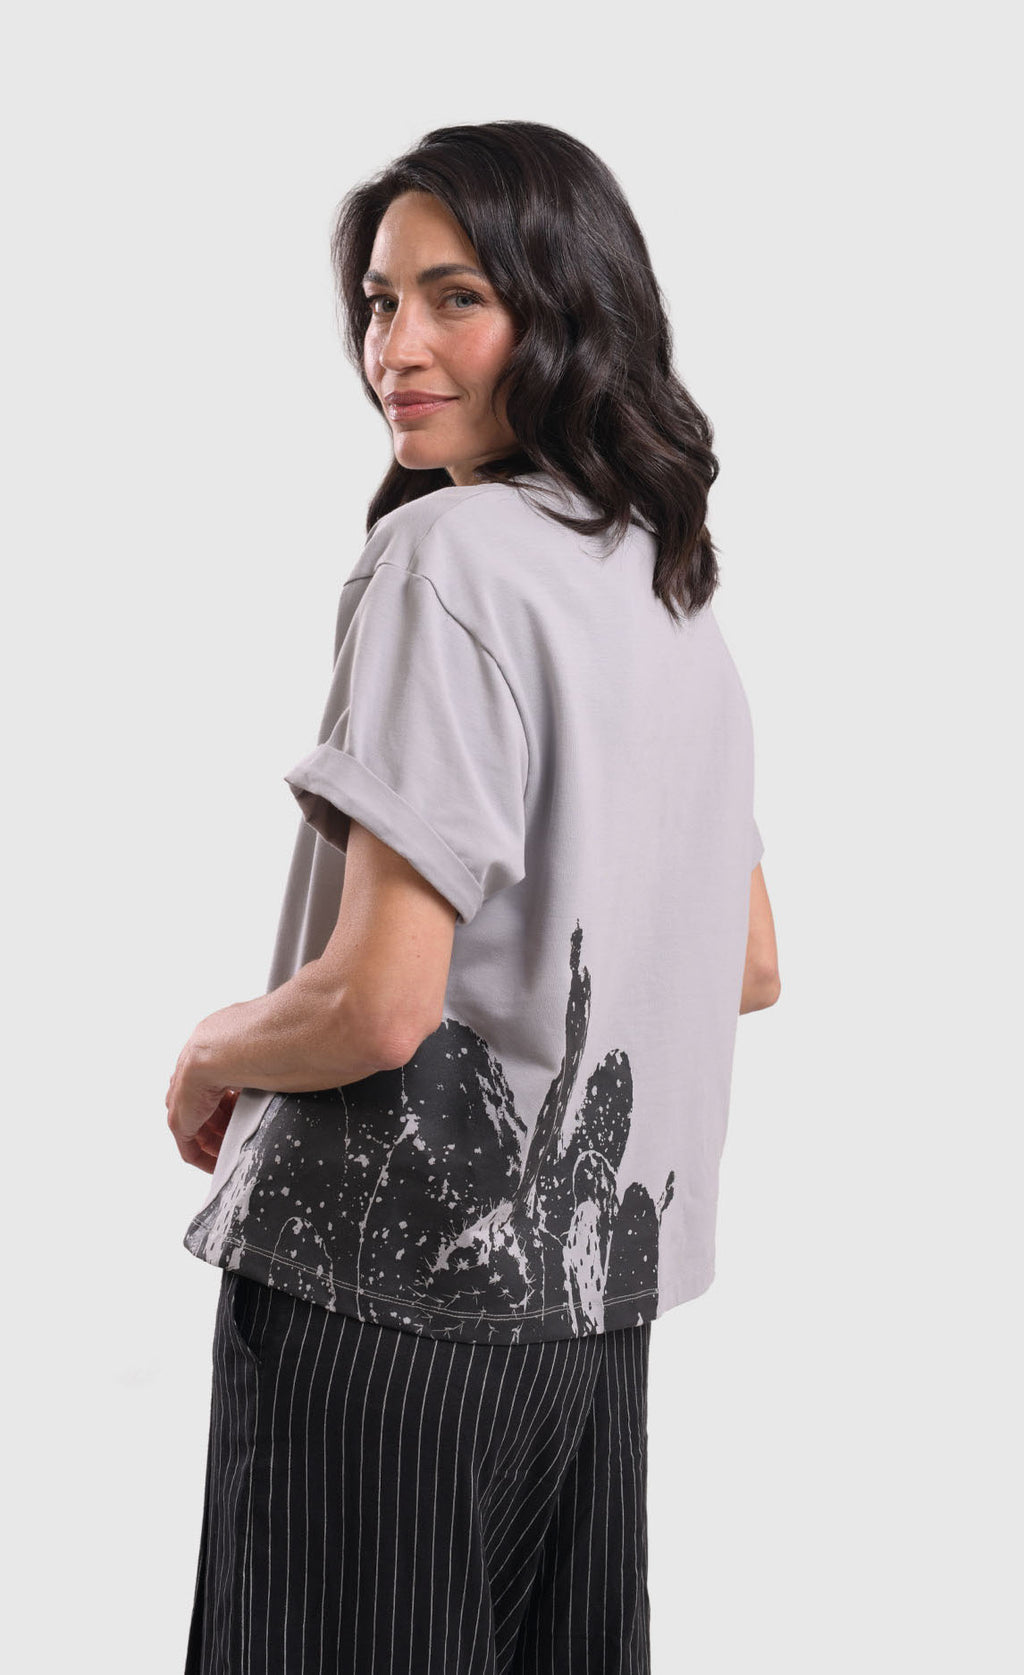 Back side top half view of a woman wearing the alembika grey cactus tee. This top is solid grey with a black stamped cactus print on the bottom of the left side. The top has short sleeves that are rolled up and a boxy silhouette.